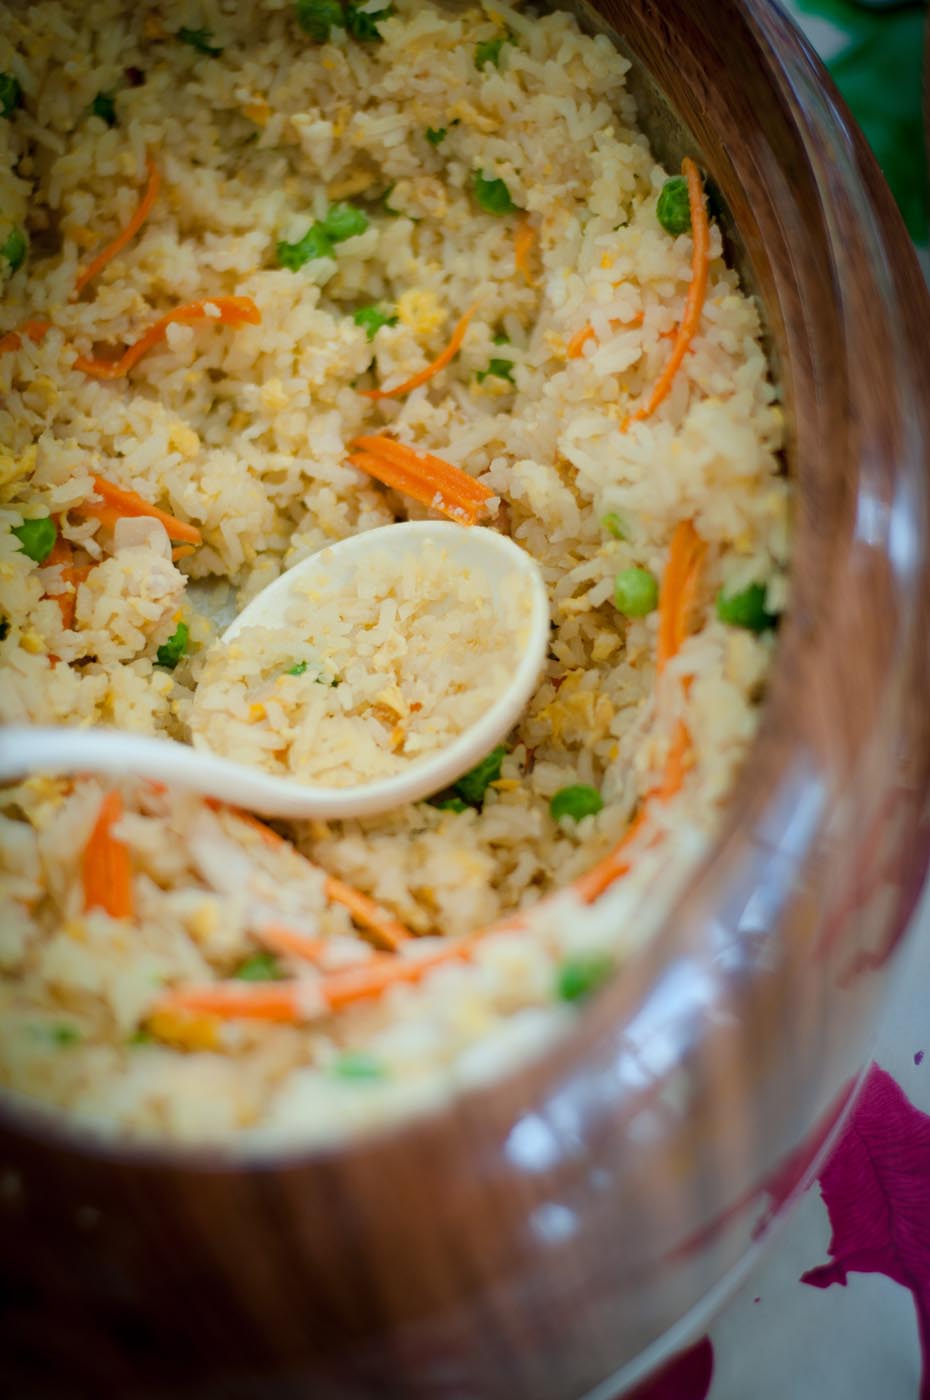 Photo showing a detail view of fried rice with peas and carrot slivers visible amongst the egg and rice - click to view larger image